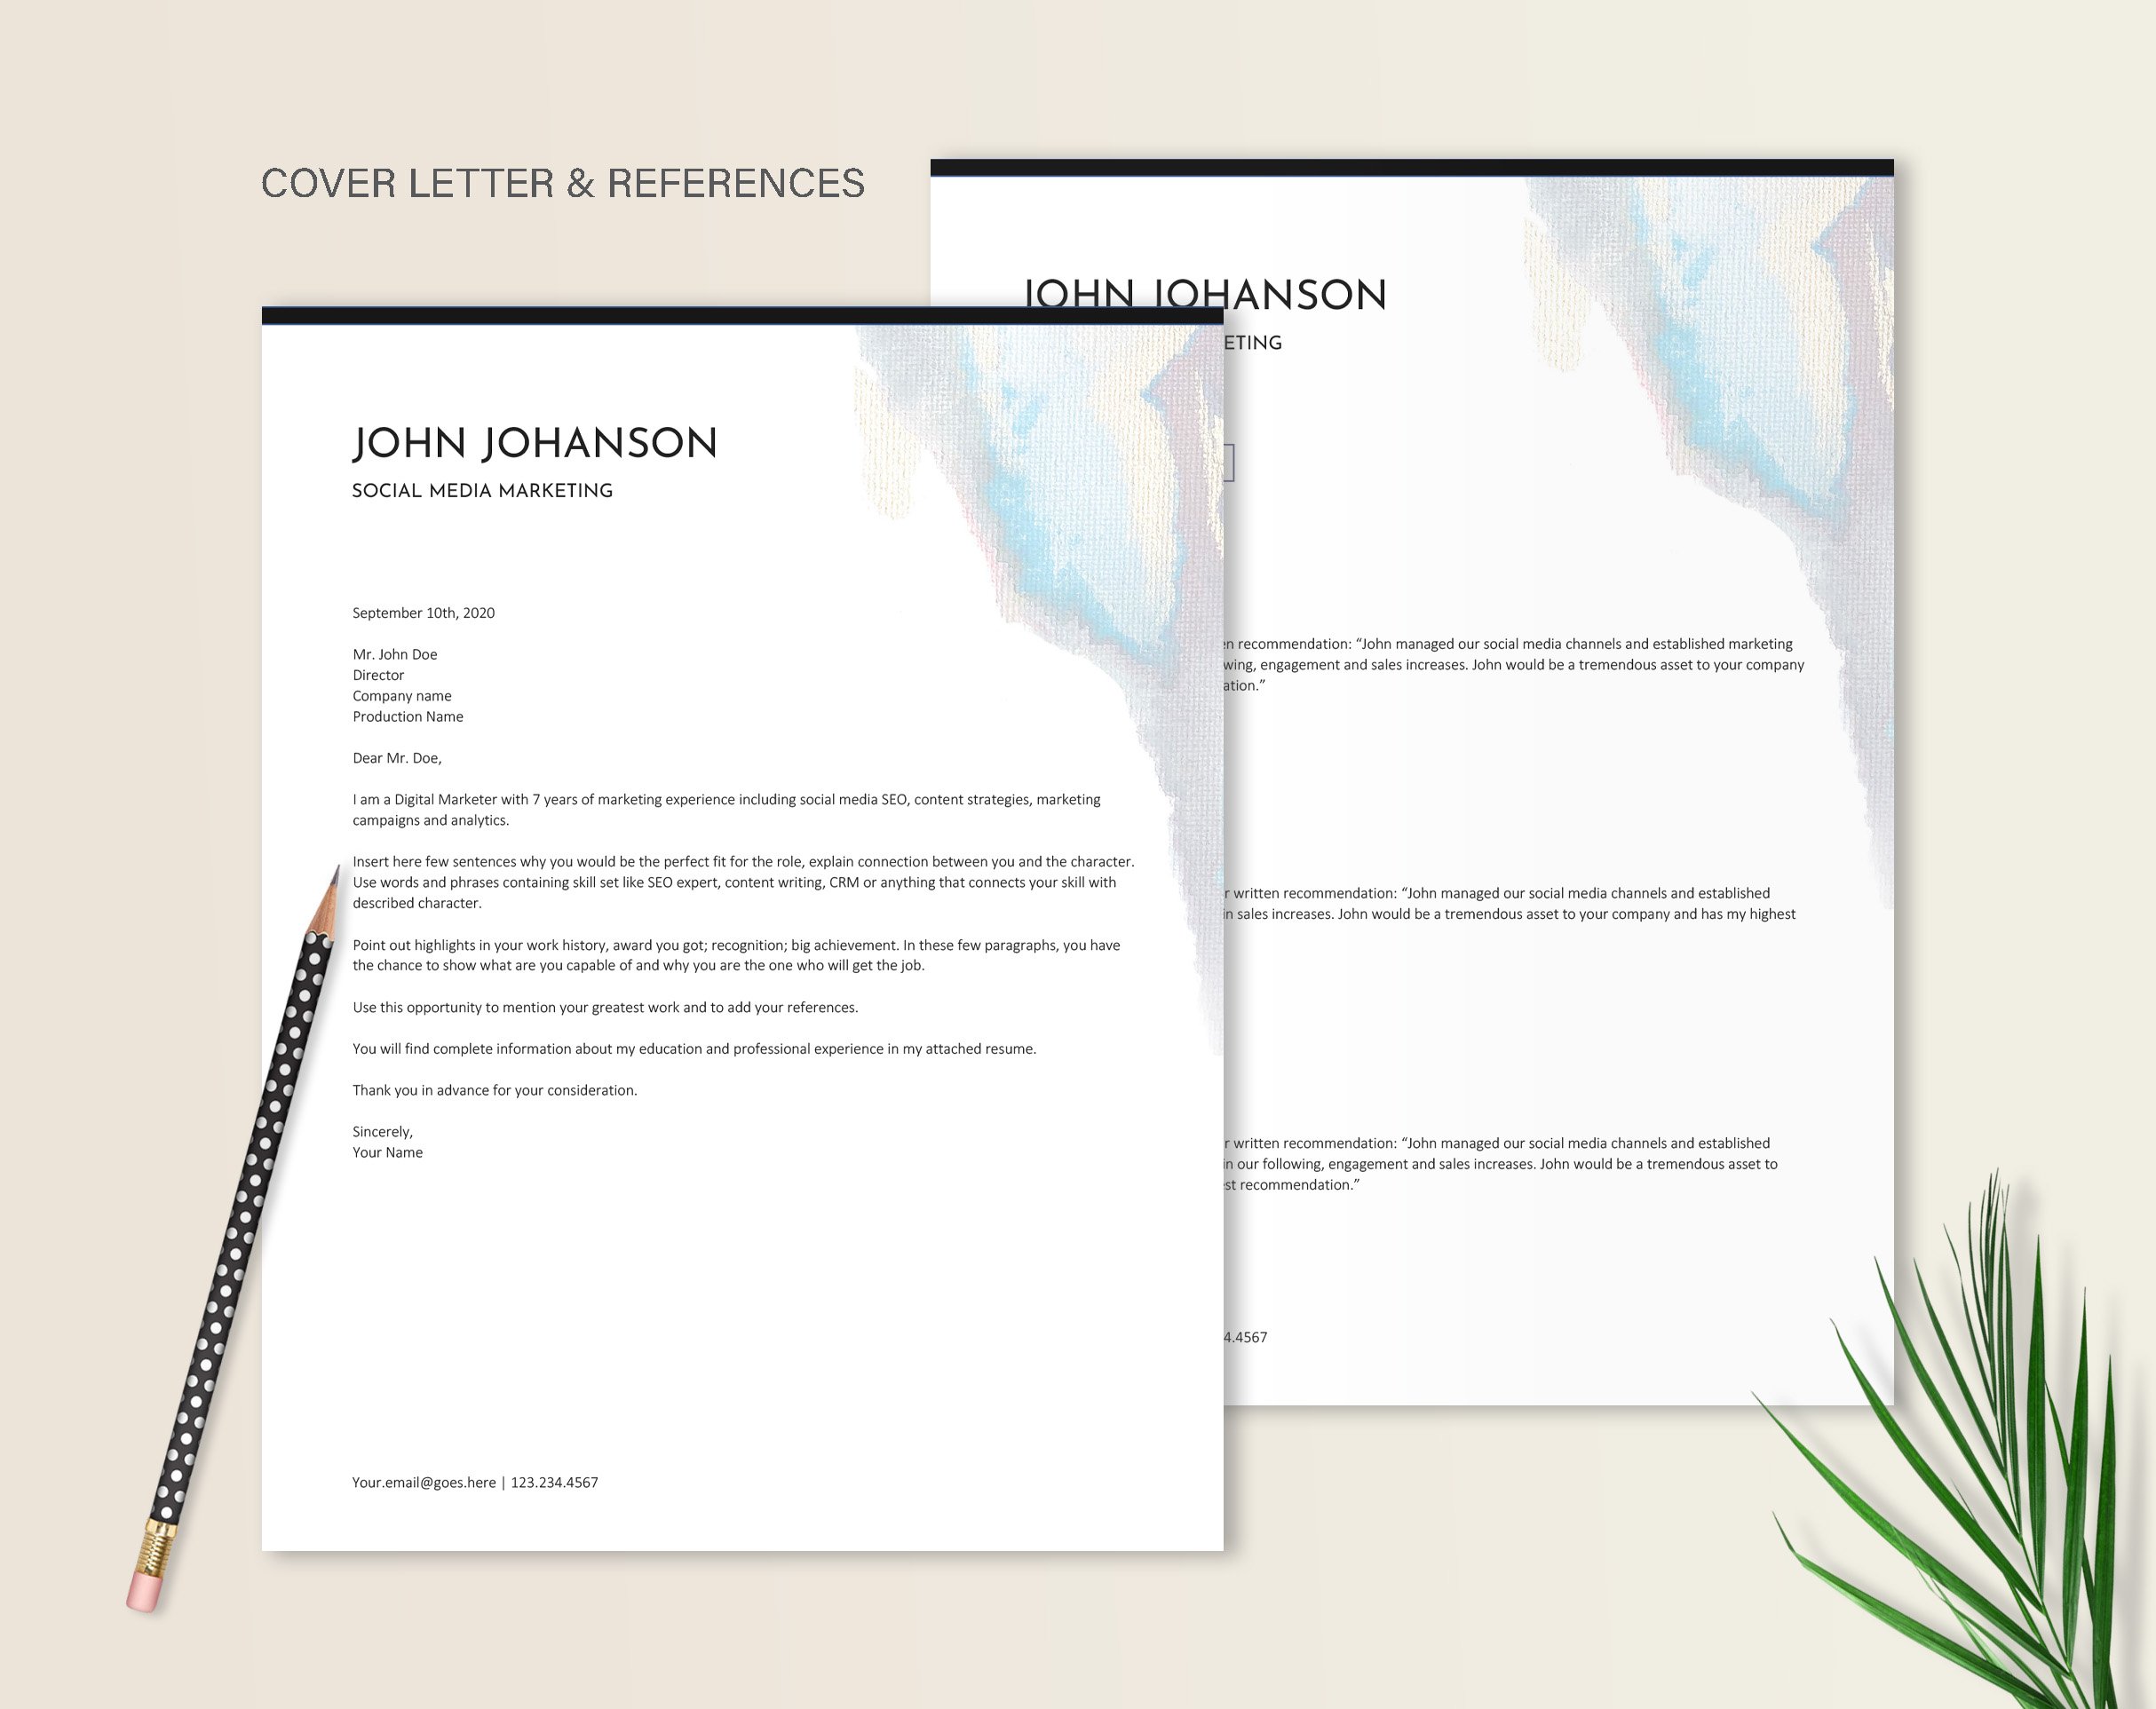 04 cover letter references text 240